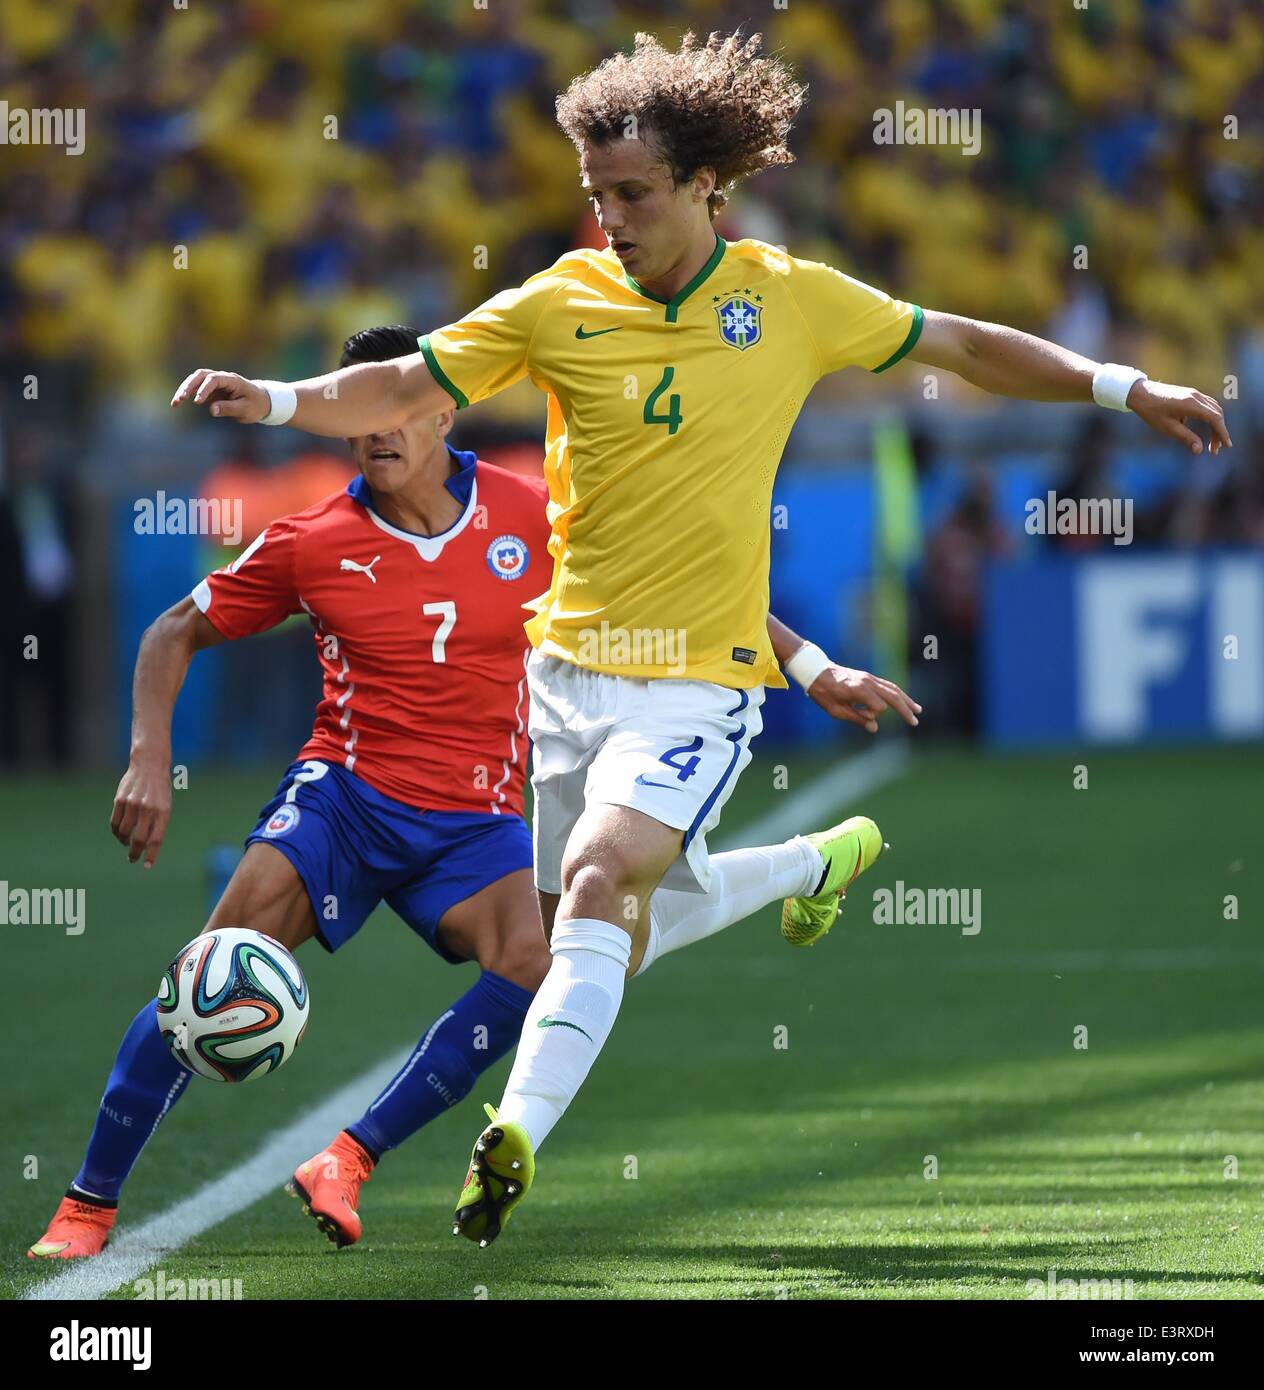 Belo Horizonte, Brazil. 28th June, 2014. Brazil's David Luiz vies with Chile's Alexis Sanchez during a Round of 16 match between Brazil and Chile of 2014 FIFA World Cup at the Estadio Mineirao Stadium in Belo Horizonte, Brazil, on June 28, 2014. Credit:  Liu Dawei/Xinhua/Alamy Live News Stock Photo